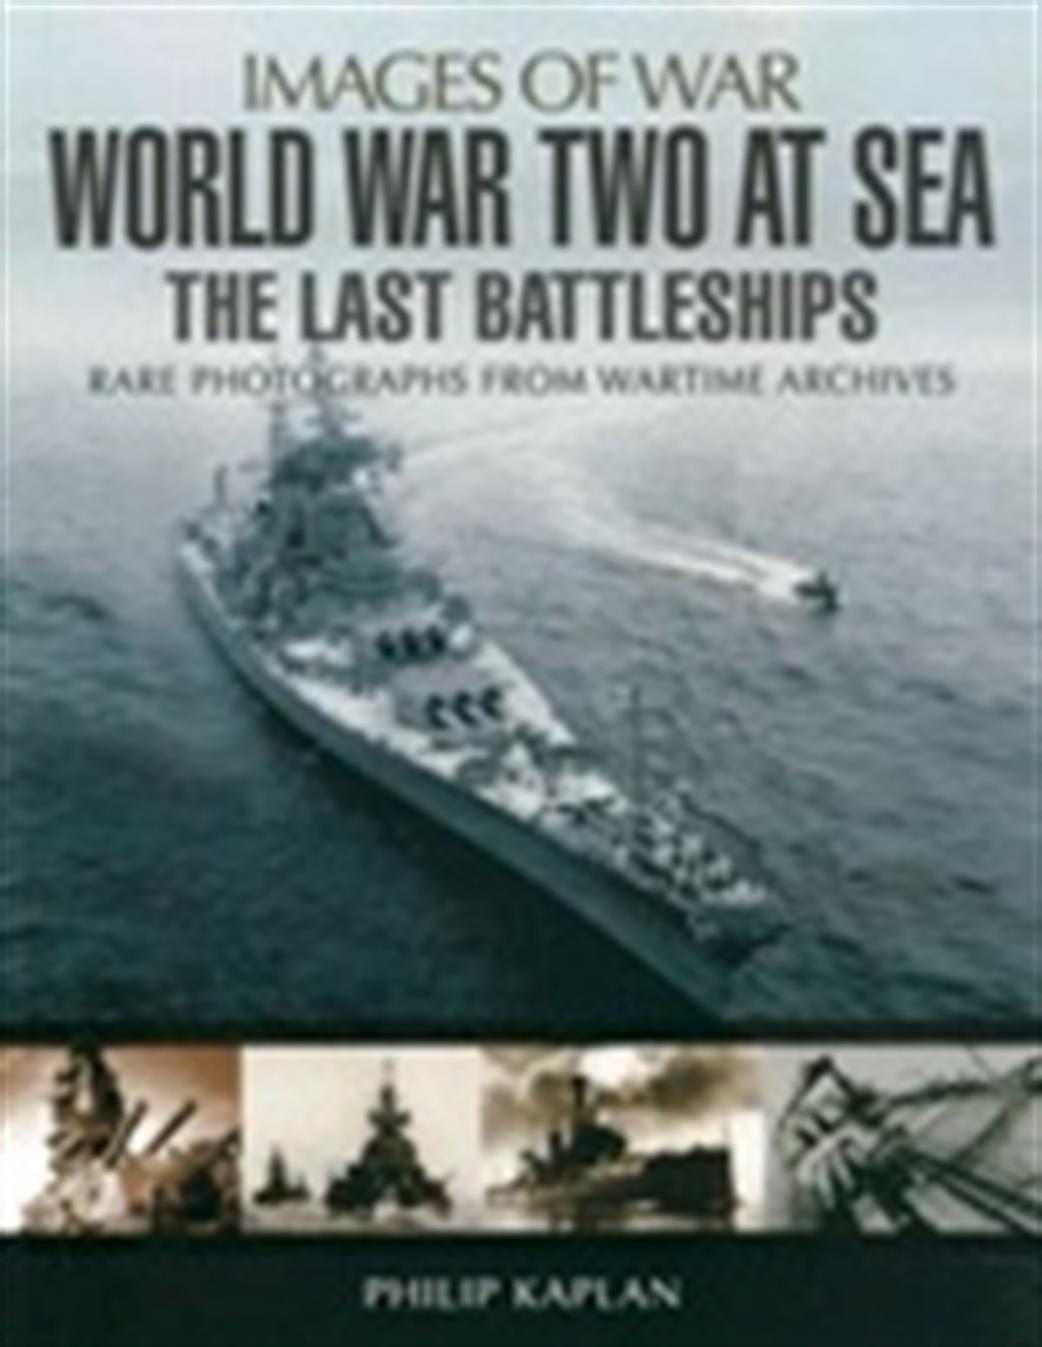 Pen & Sword 9781783036387 Images of War World War Two at Sea The Last Battleships by Philip Kaplan